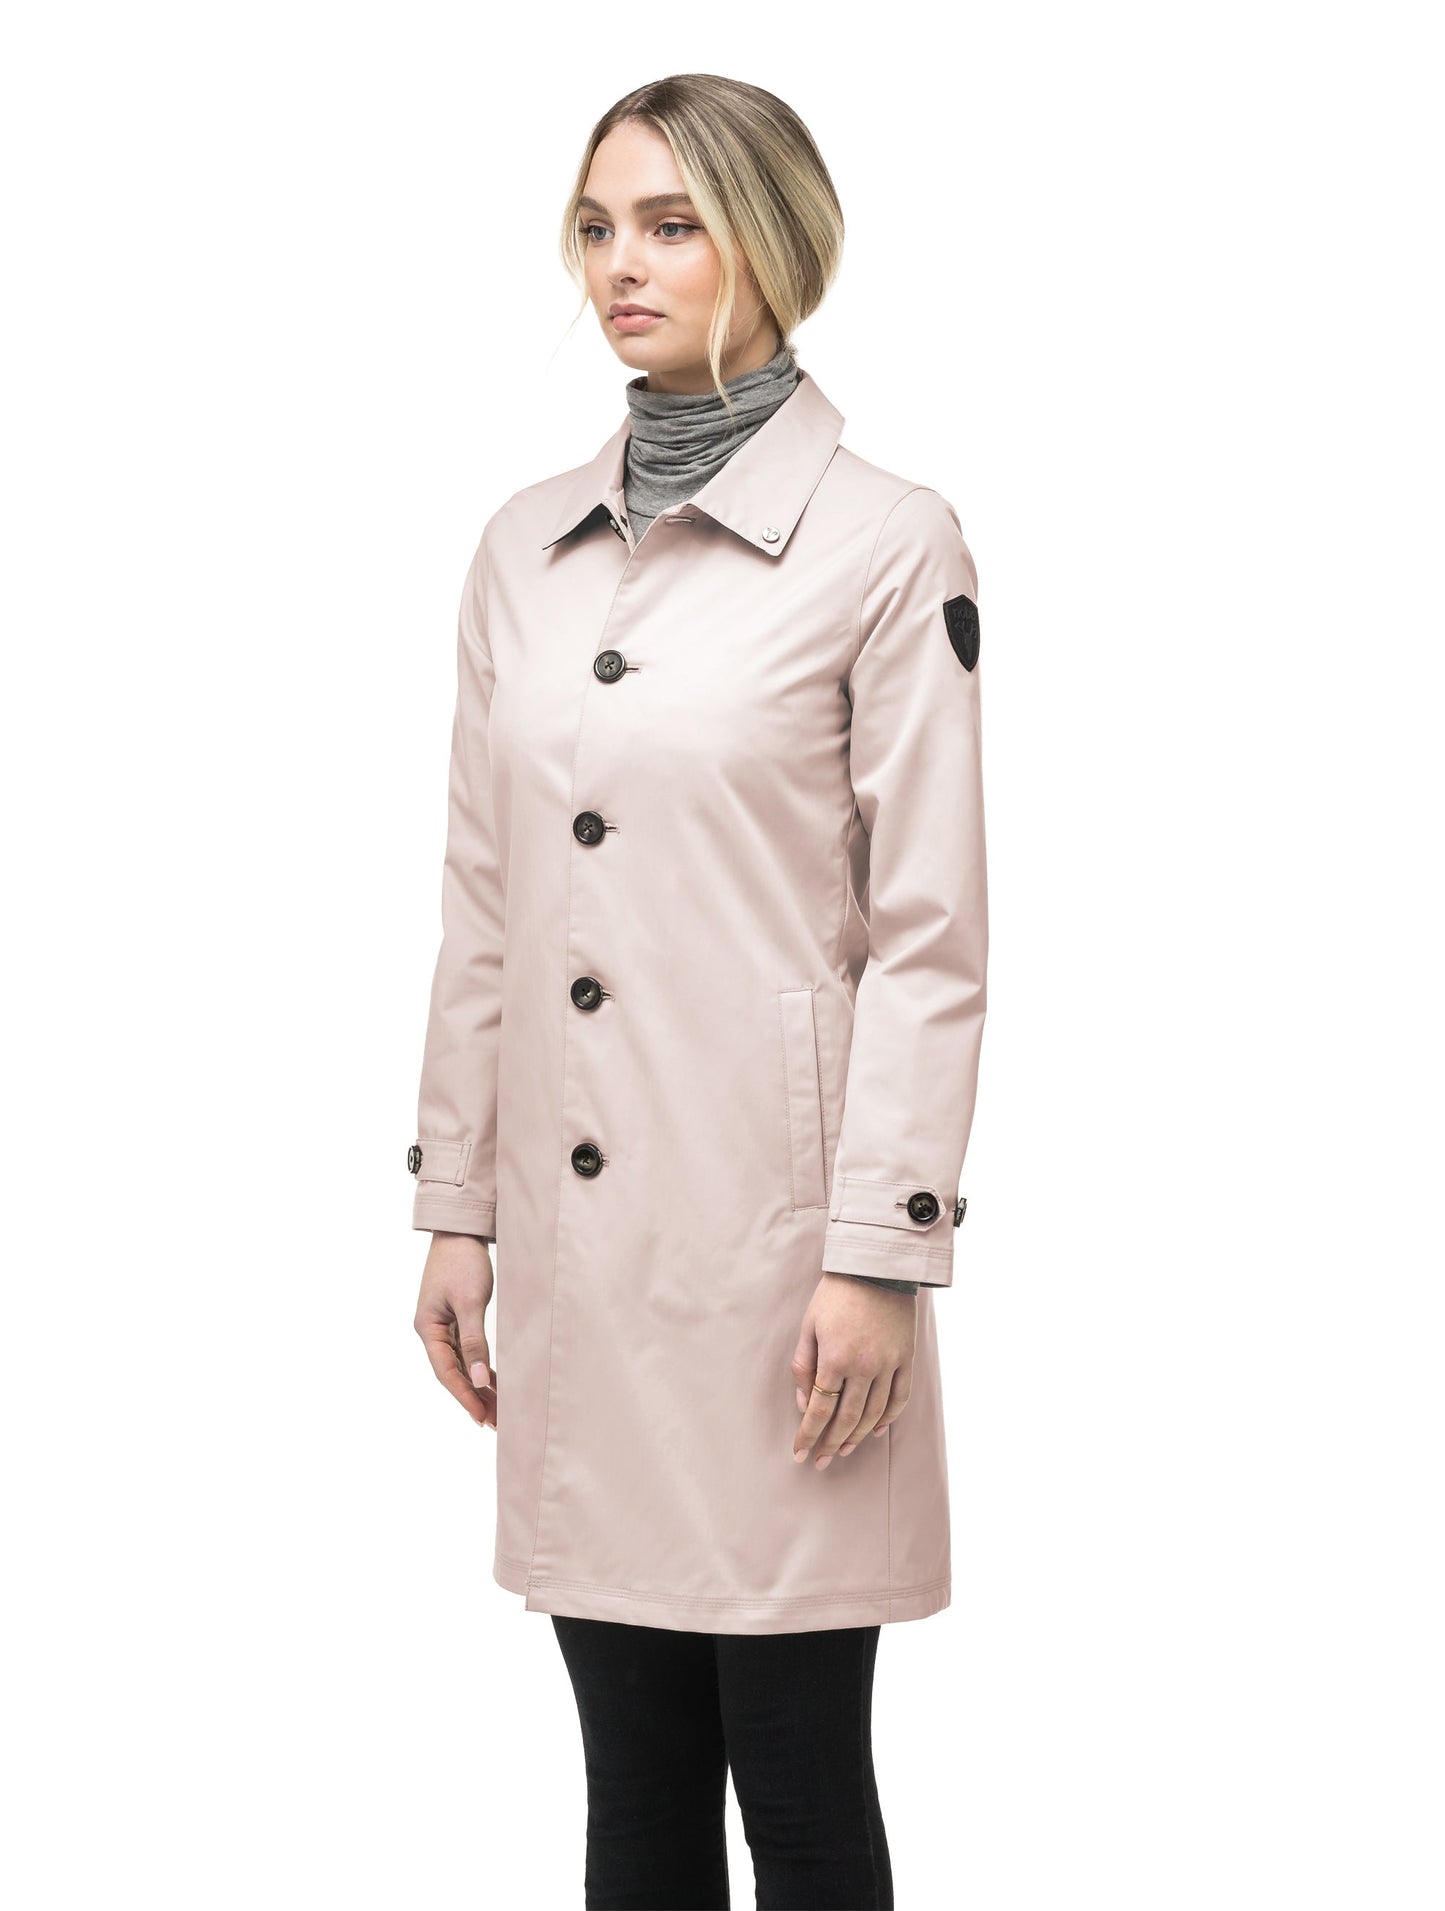 Women's thigh length Mackintosh jacket in Dusty Rose